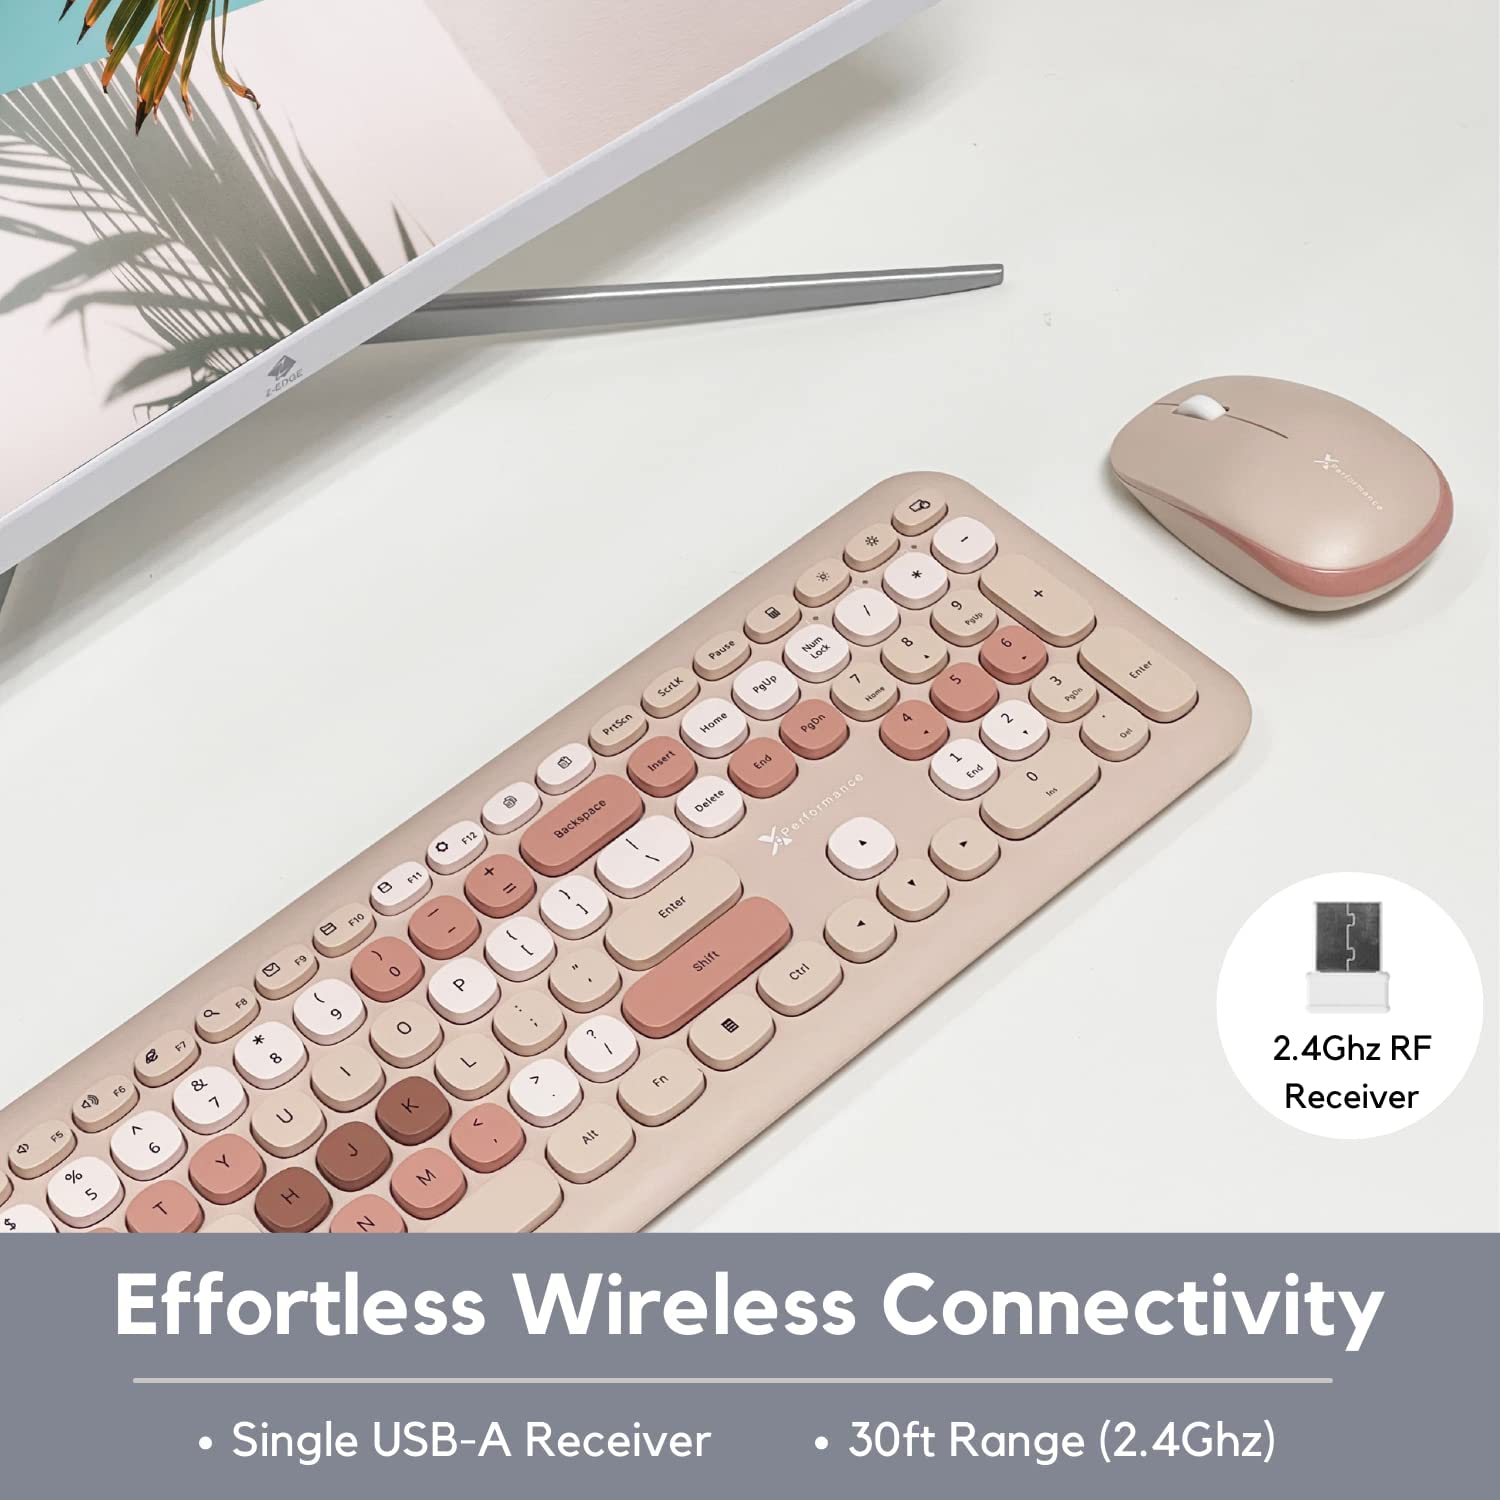 X9 Performance Colorful Keyboard and Mouse Combo - 2.4G Wireless Connectivity - Transform Your Space with a Cute Wireless Keyboard and Mouse Set (110 Keys and 18 Shortcuts) - for PC and Chrome - Brown